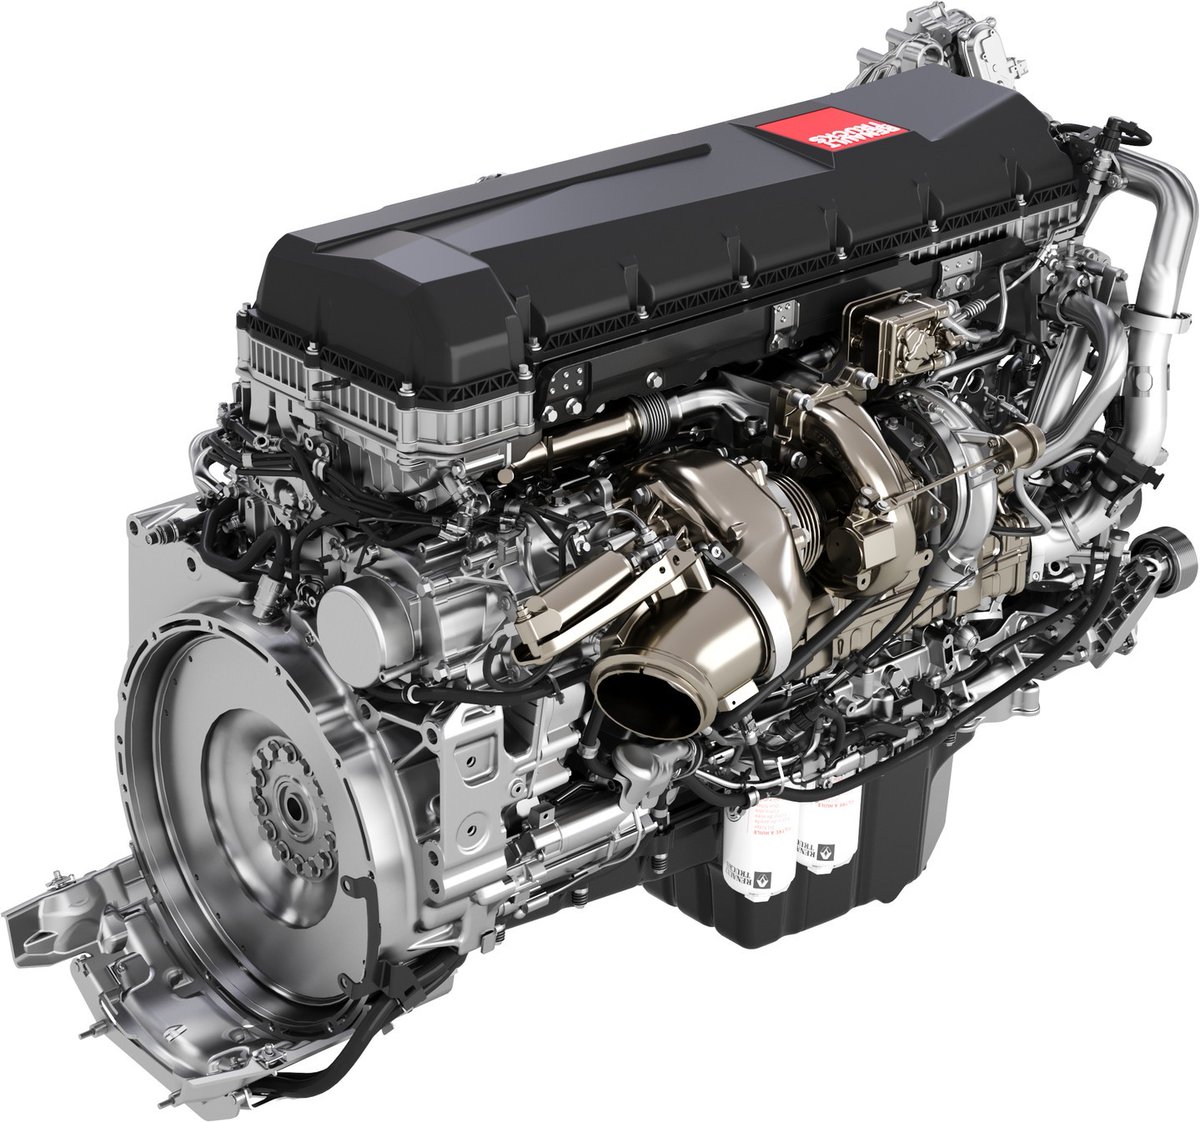 Save on fuel with new generation engines 😎👌 Boost performance & save up to 10% on fuel with our Turbo Compound technology, available in Renault Trucks T, T High, and C ranges 💪 Discover more here 👉 bit.ly/41imrDU